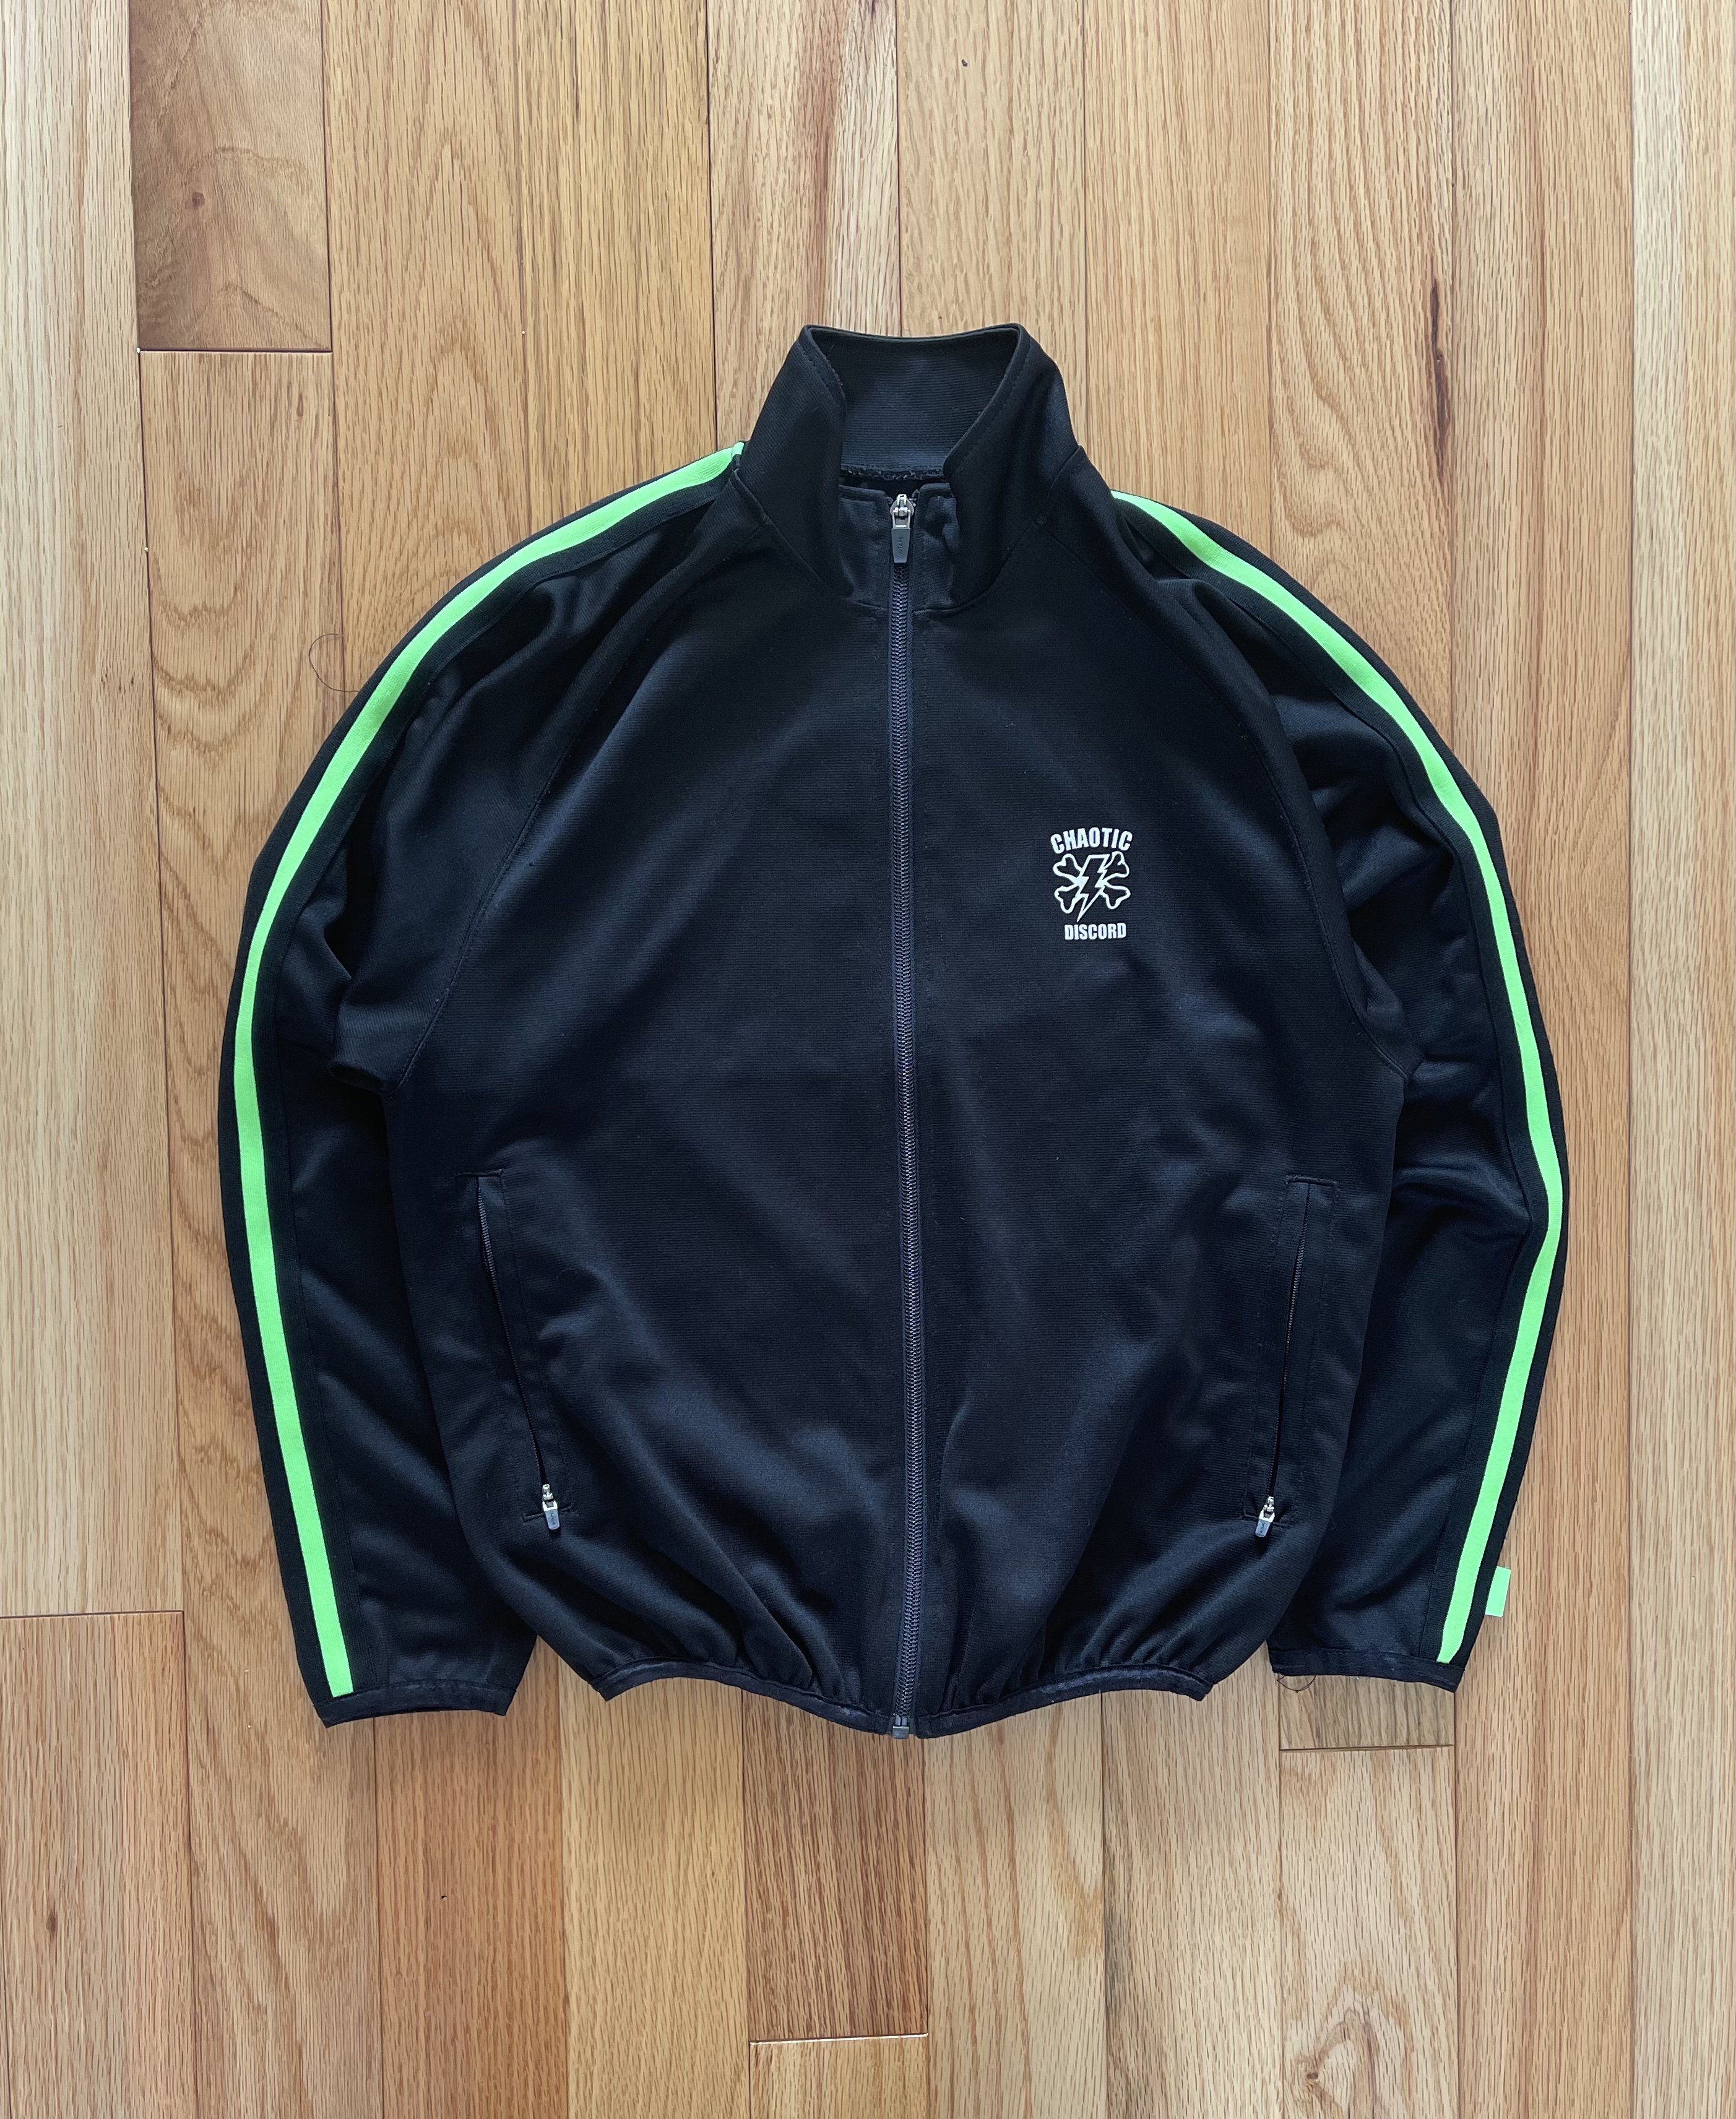 AW2001 Undercover Chaotic Discord Track Jacket | Reissue: Buy & Sell ...